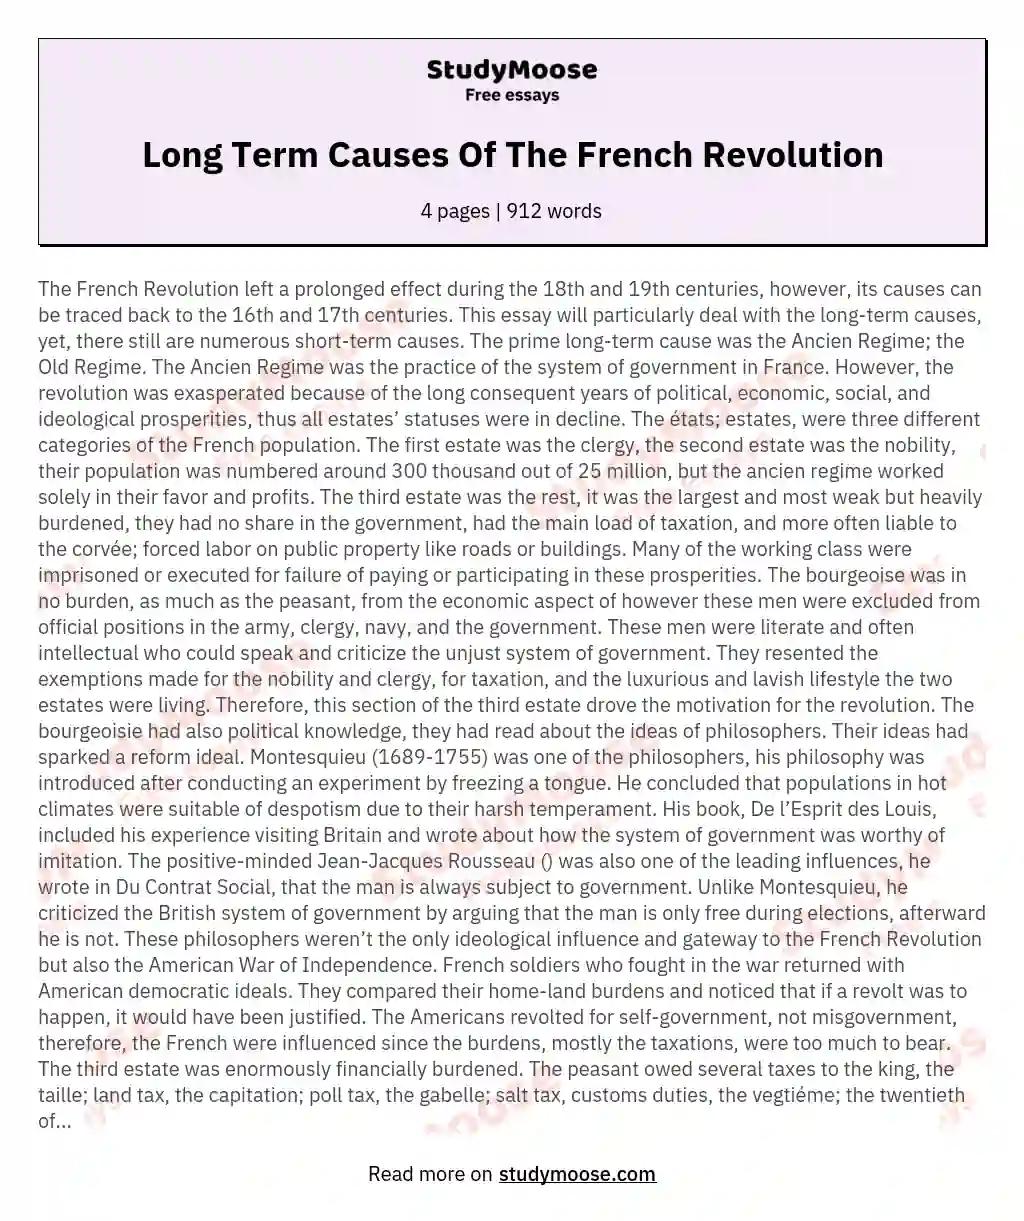 3 causes of french revolution essay